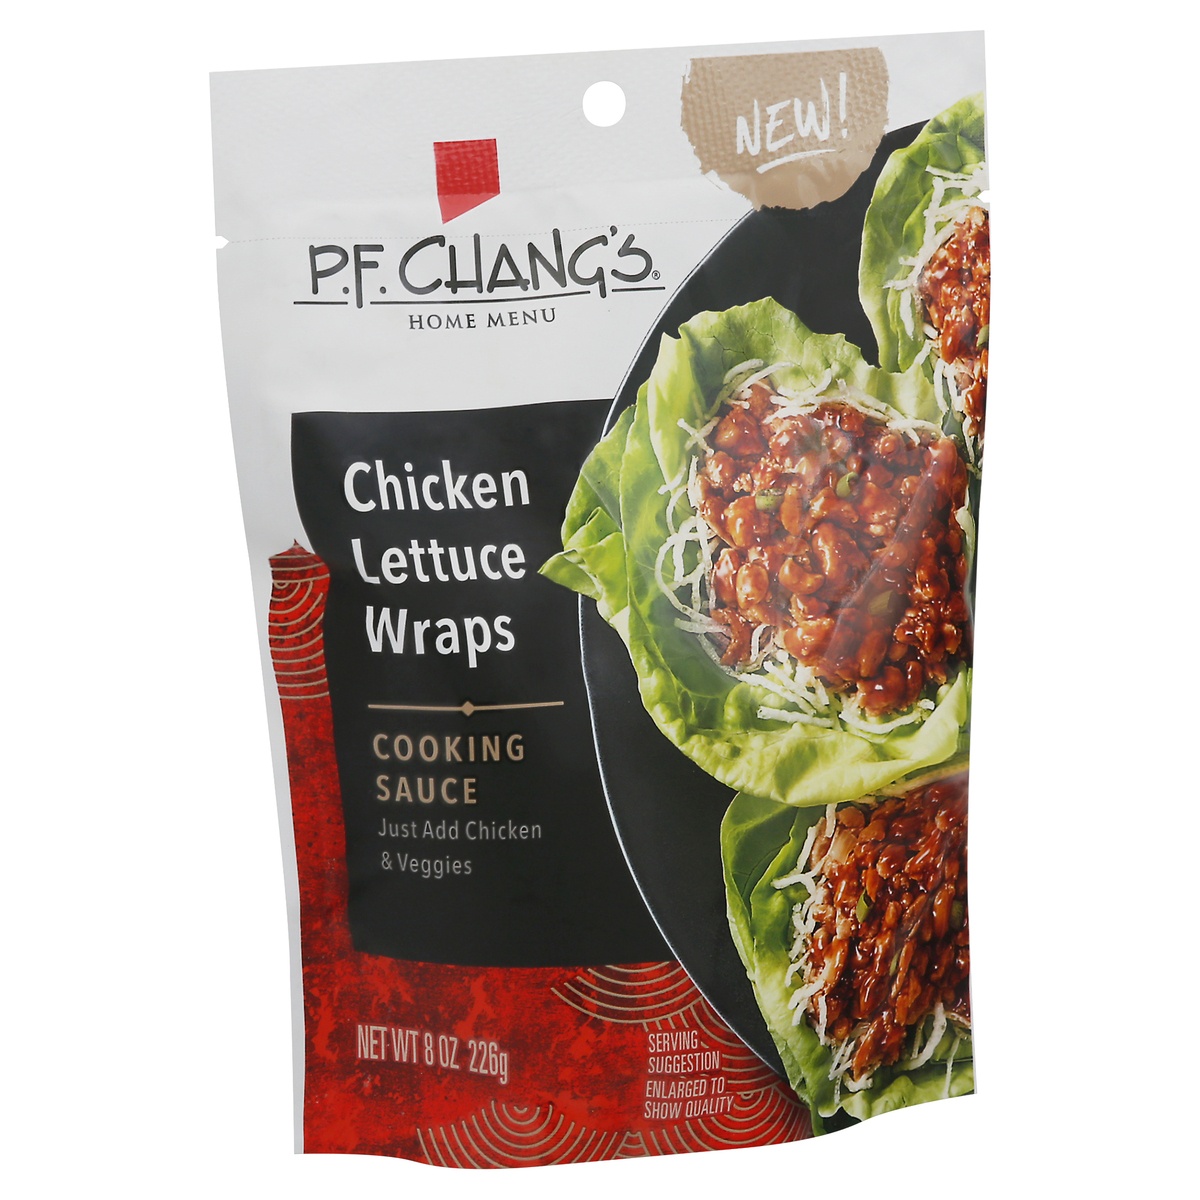 slide 3 of 9, P.F. Chang's Home Menu Chicken Lettuce Wraps Cooking Sauce Pouch, 8 oz., 8 oz